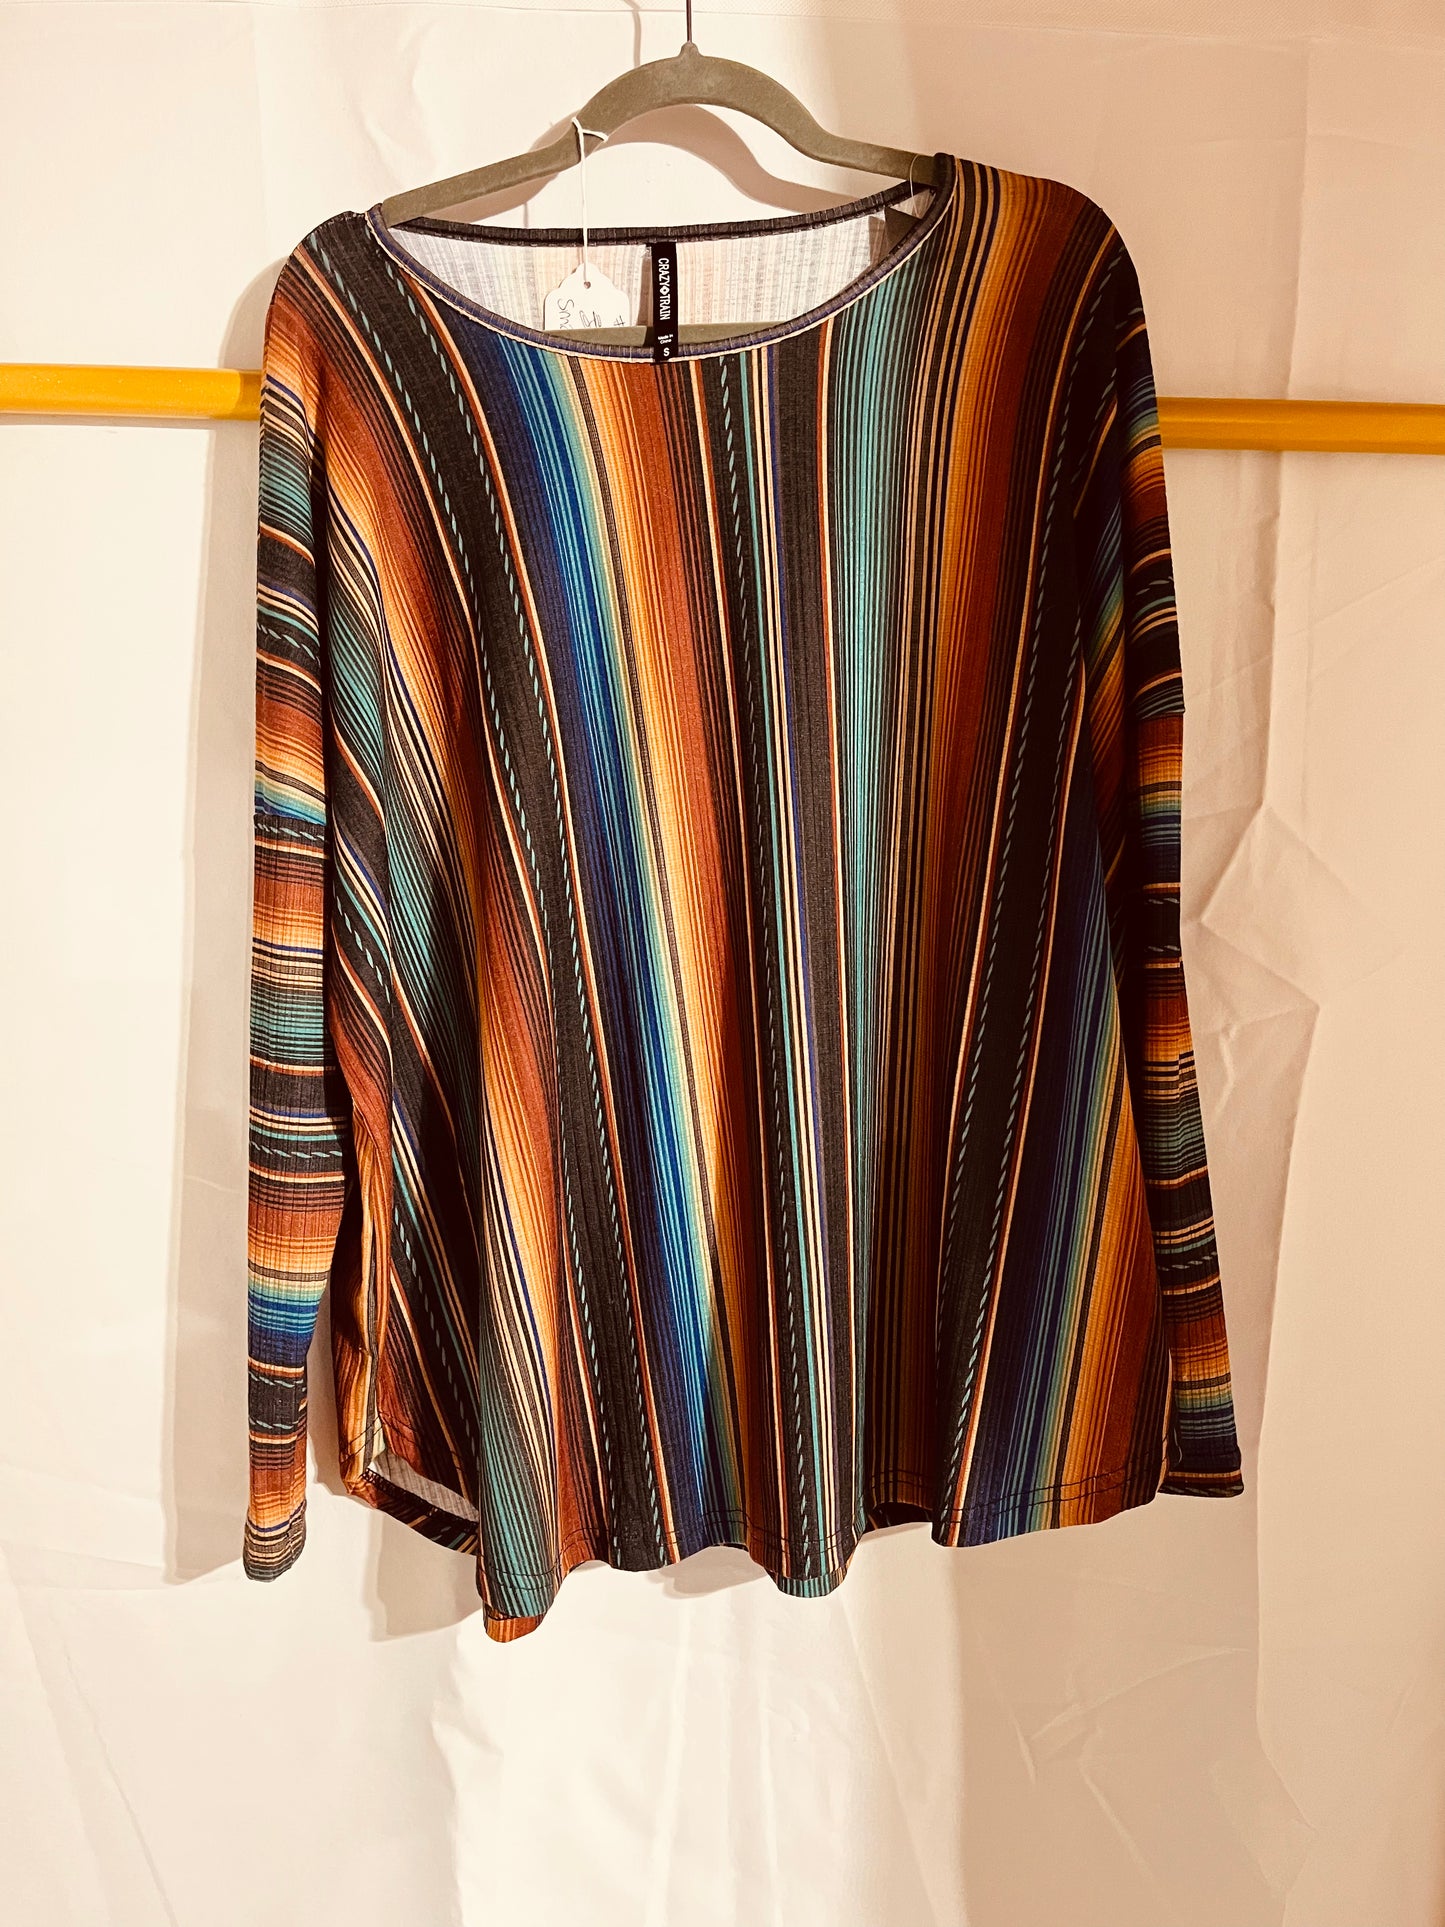 Teal brown striped long sleeve small, unisex sizing roomy fit